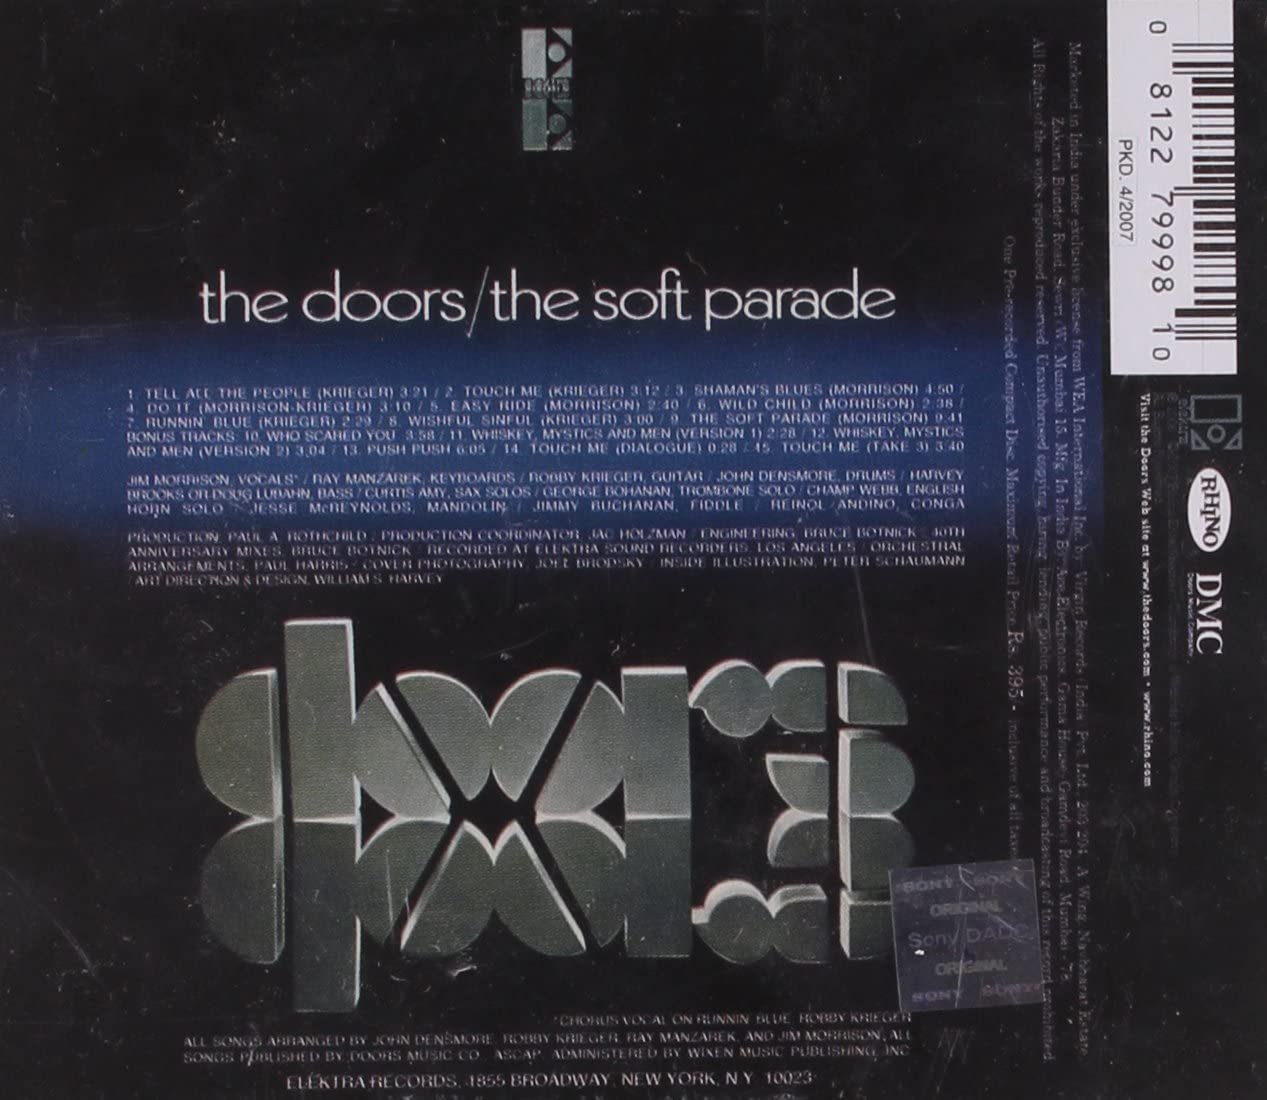 The Doors - The Soft Parade (40th Anniversary Mixes) [Expanded] - CD